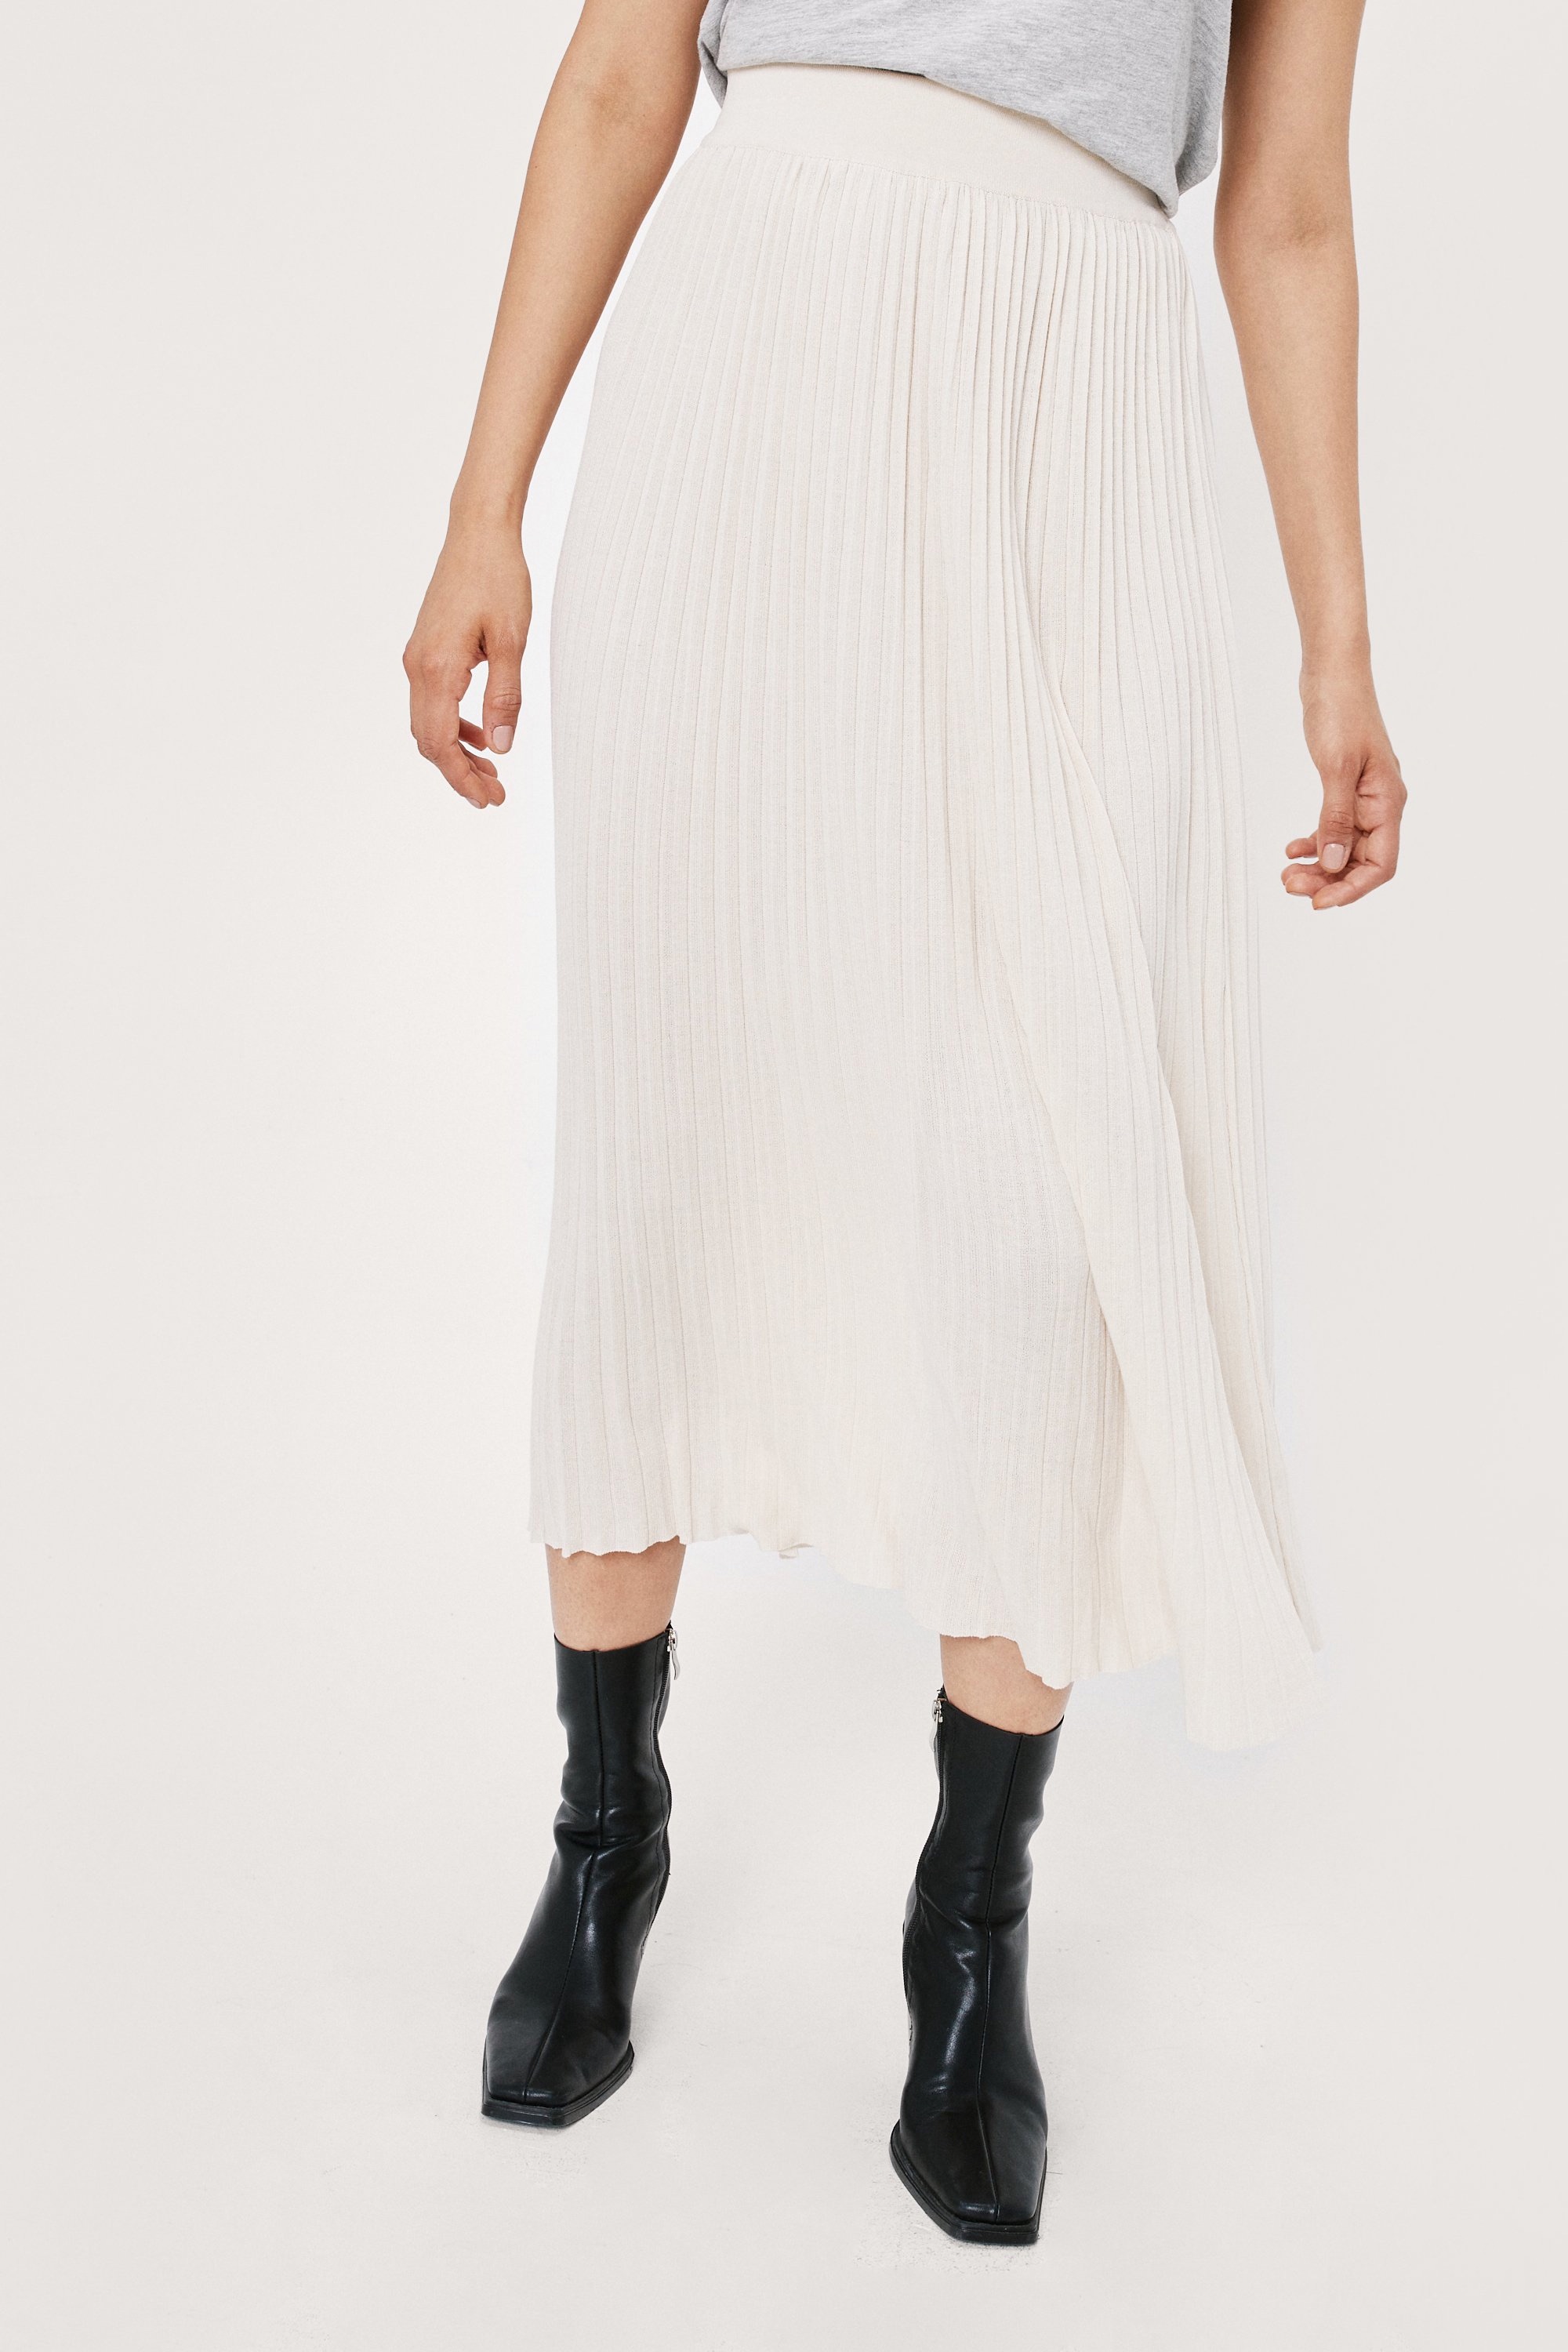 28 Knitted Midi Skirts the Style Set Is Loving Right Now | Who What Wear